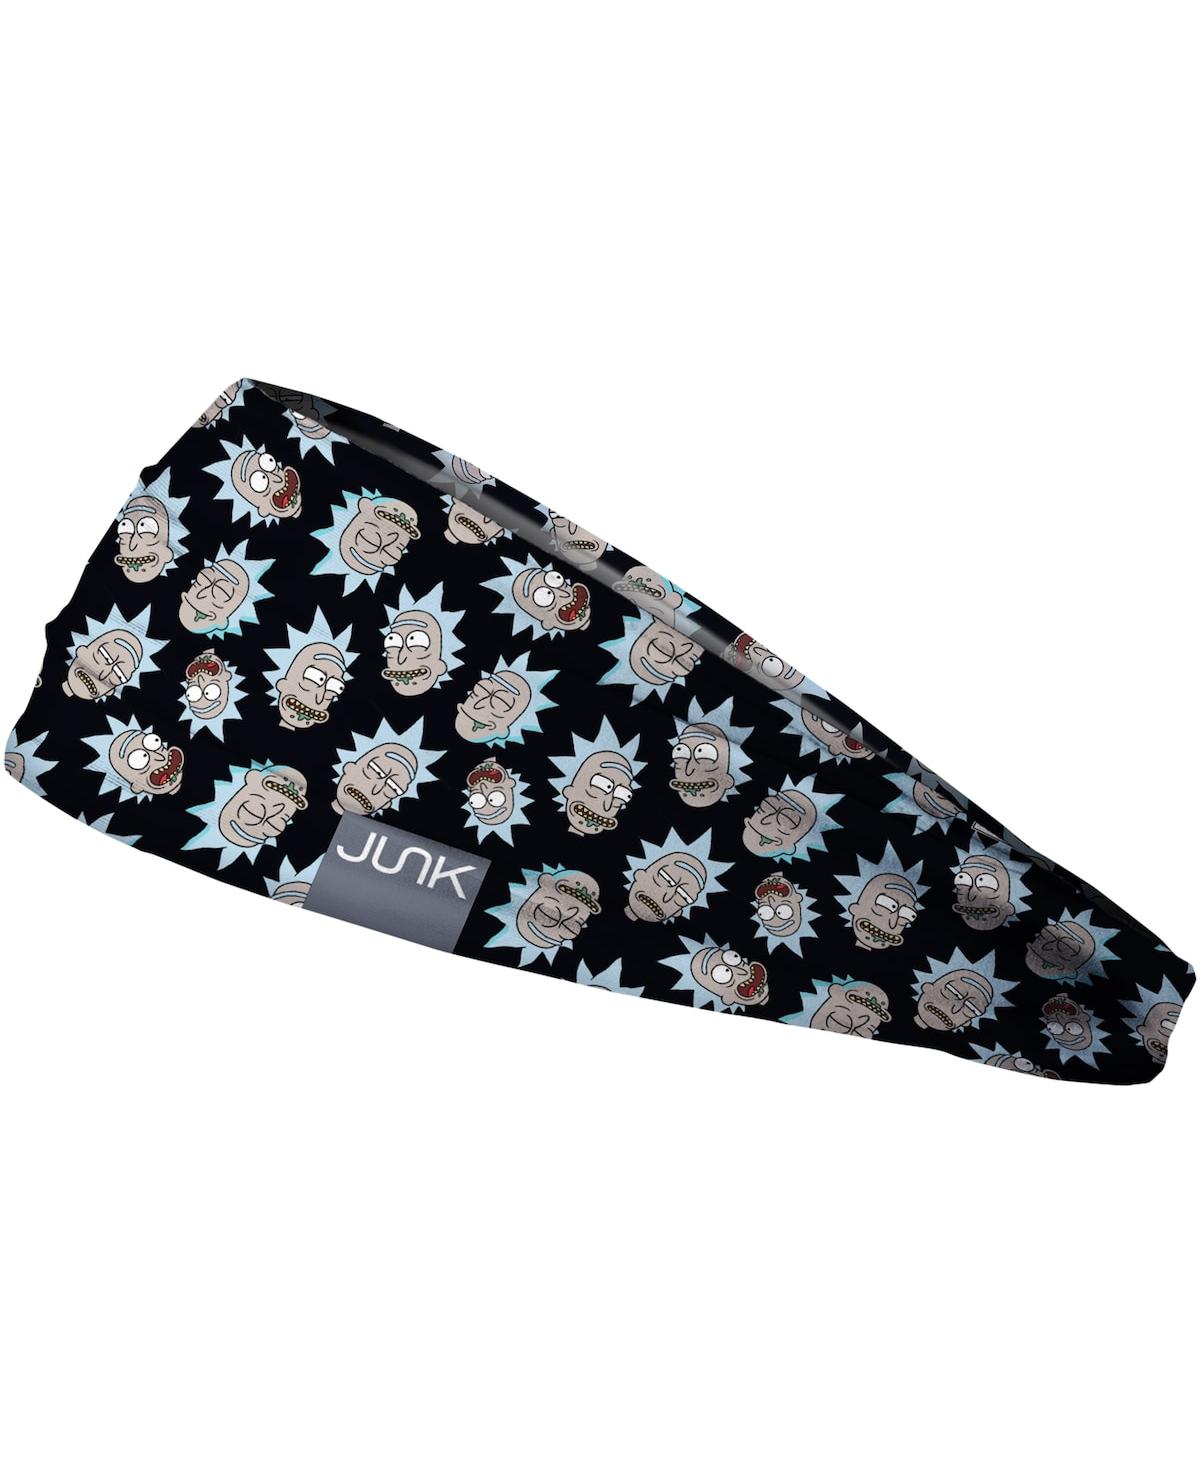 Junk Brand S Men's And Women's Rick And Morty Oversized Headband In Black